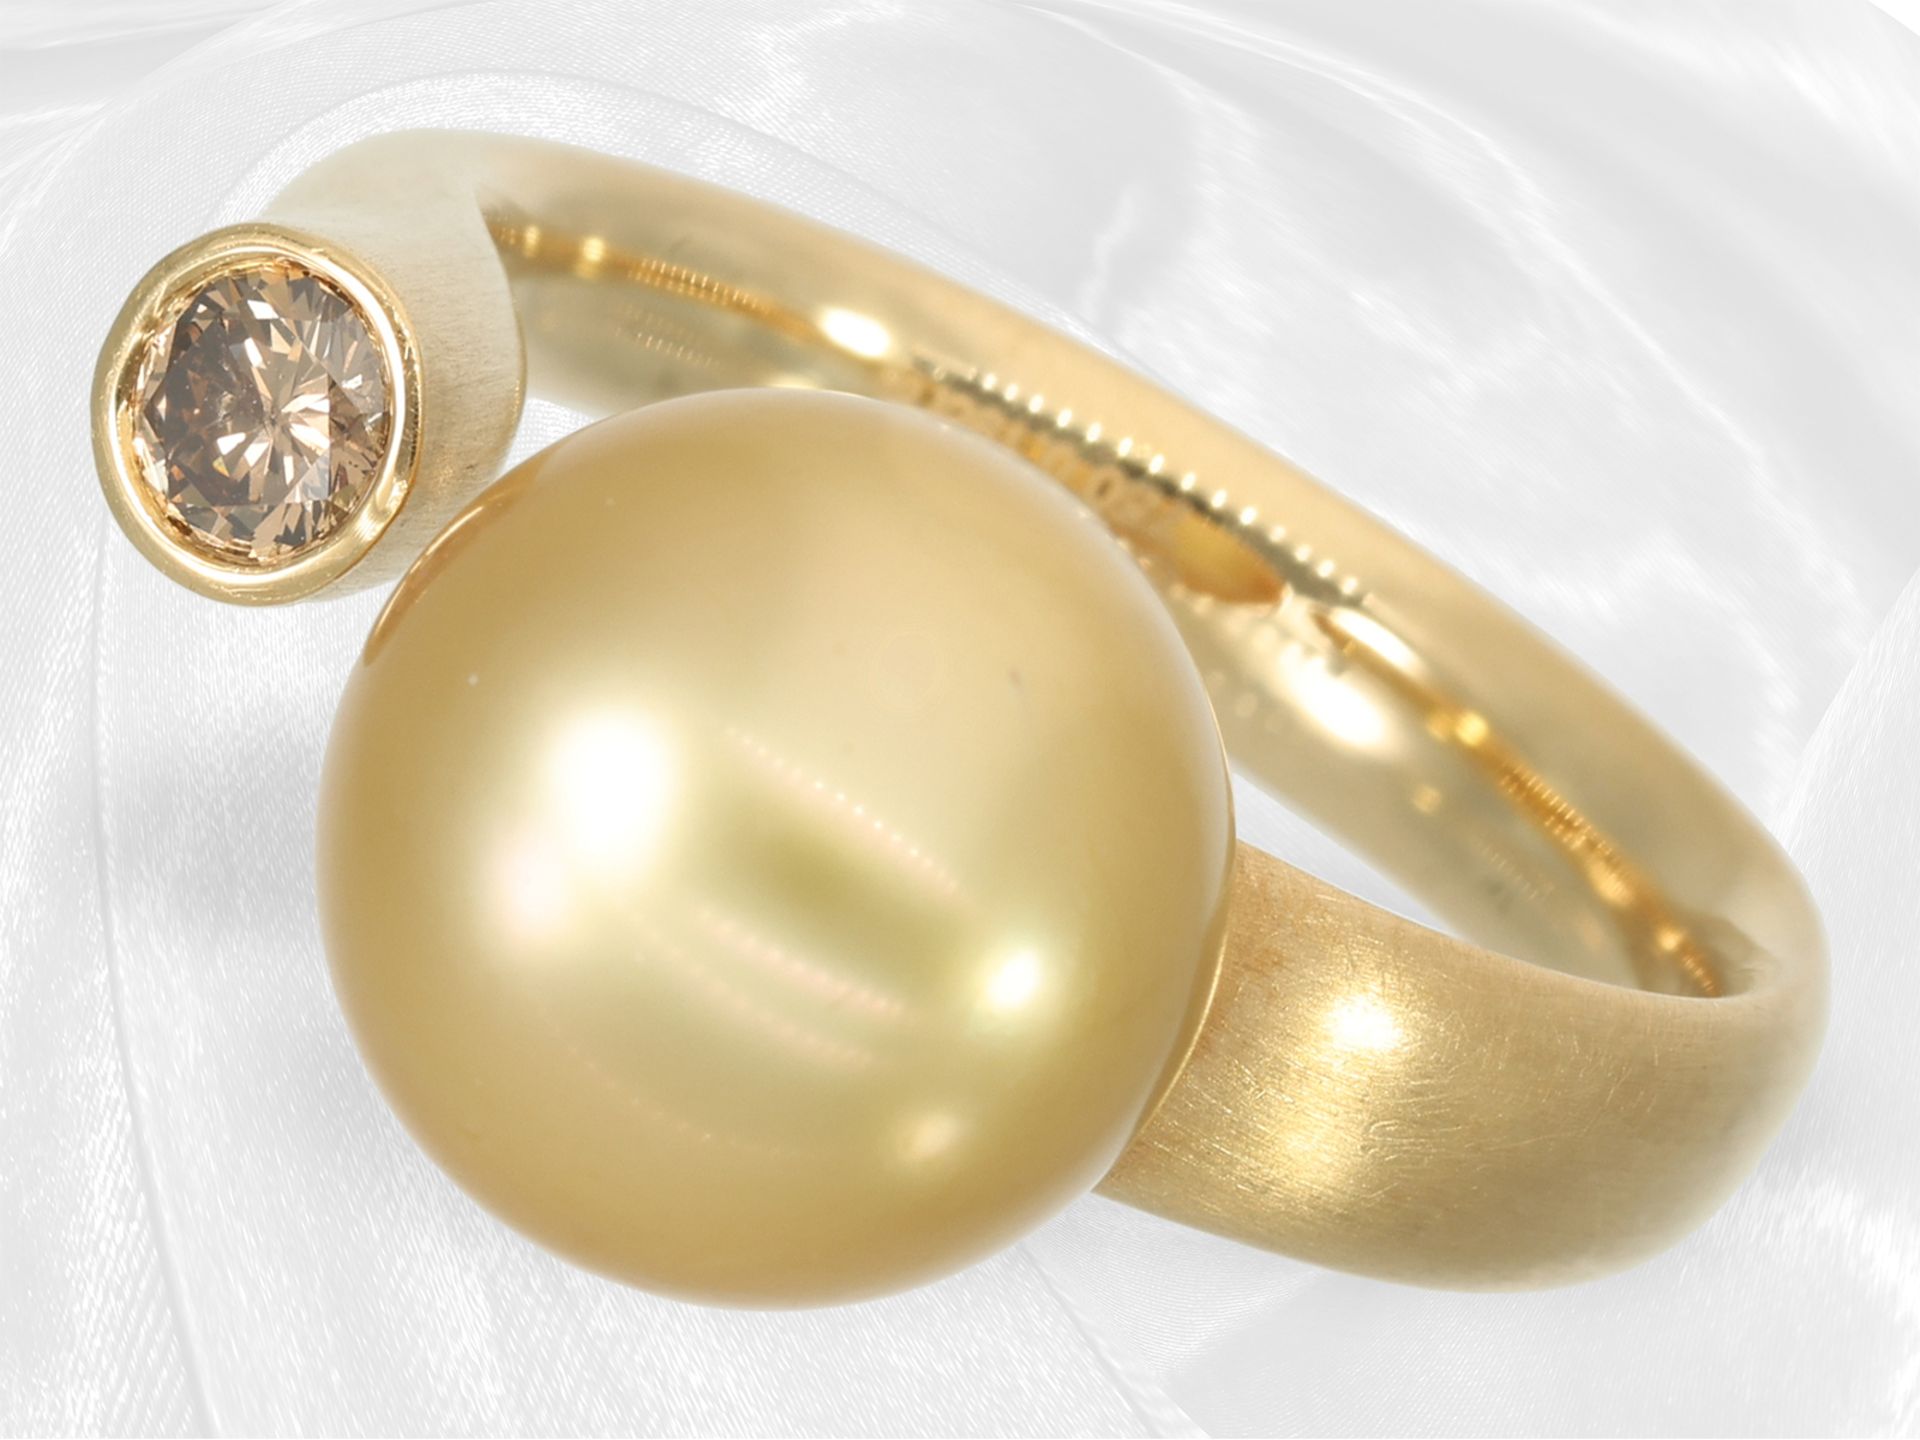 Elaborately crafted, high-quality designer ladies' ring with finest South Sea pearl and fancy diamon - Image 5 of 10